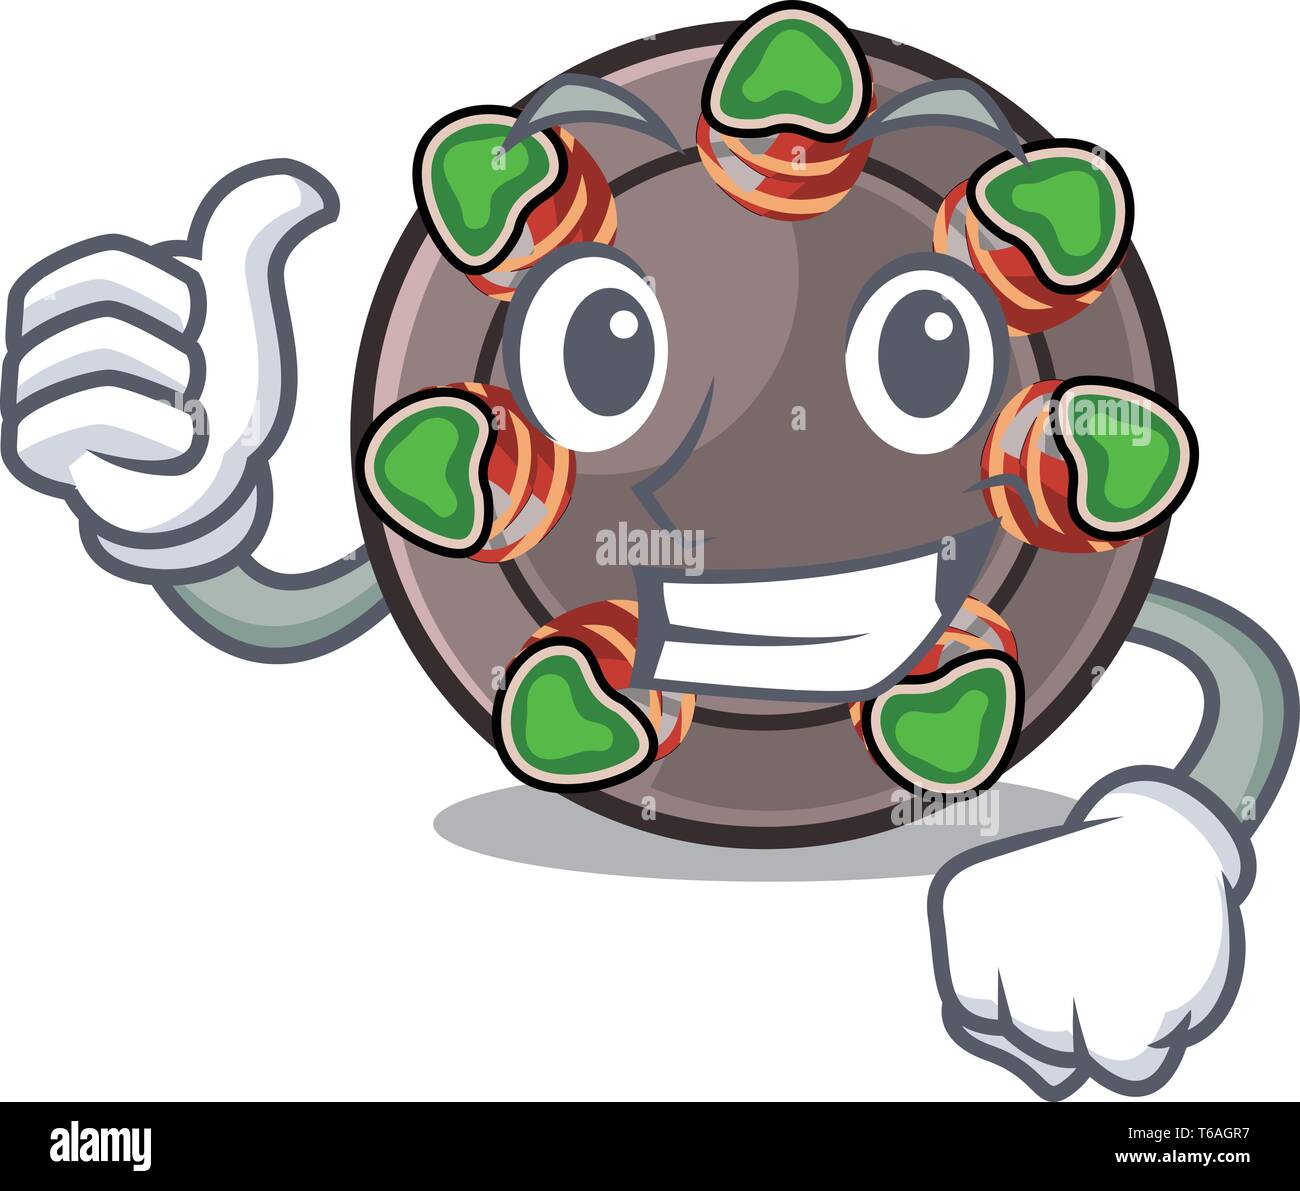 Thumbs up escargot is presented on character plates Stock Vector